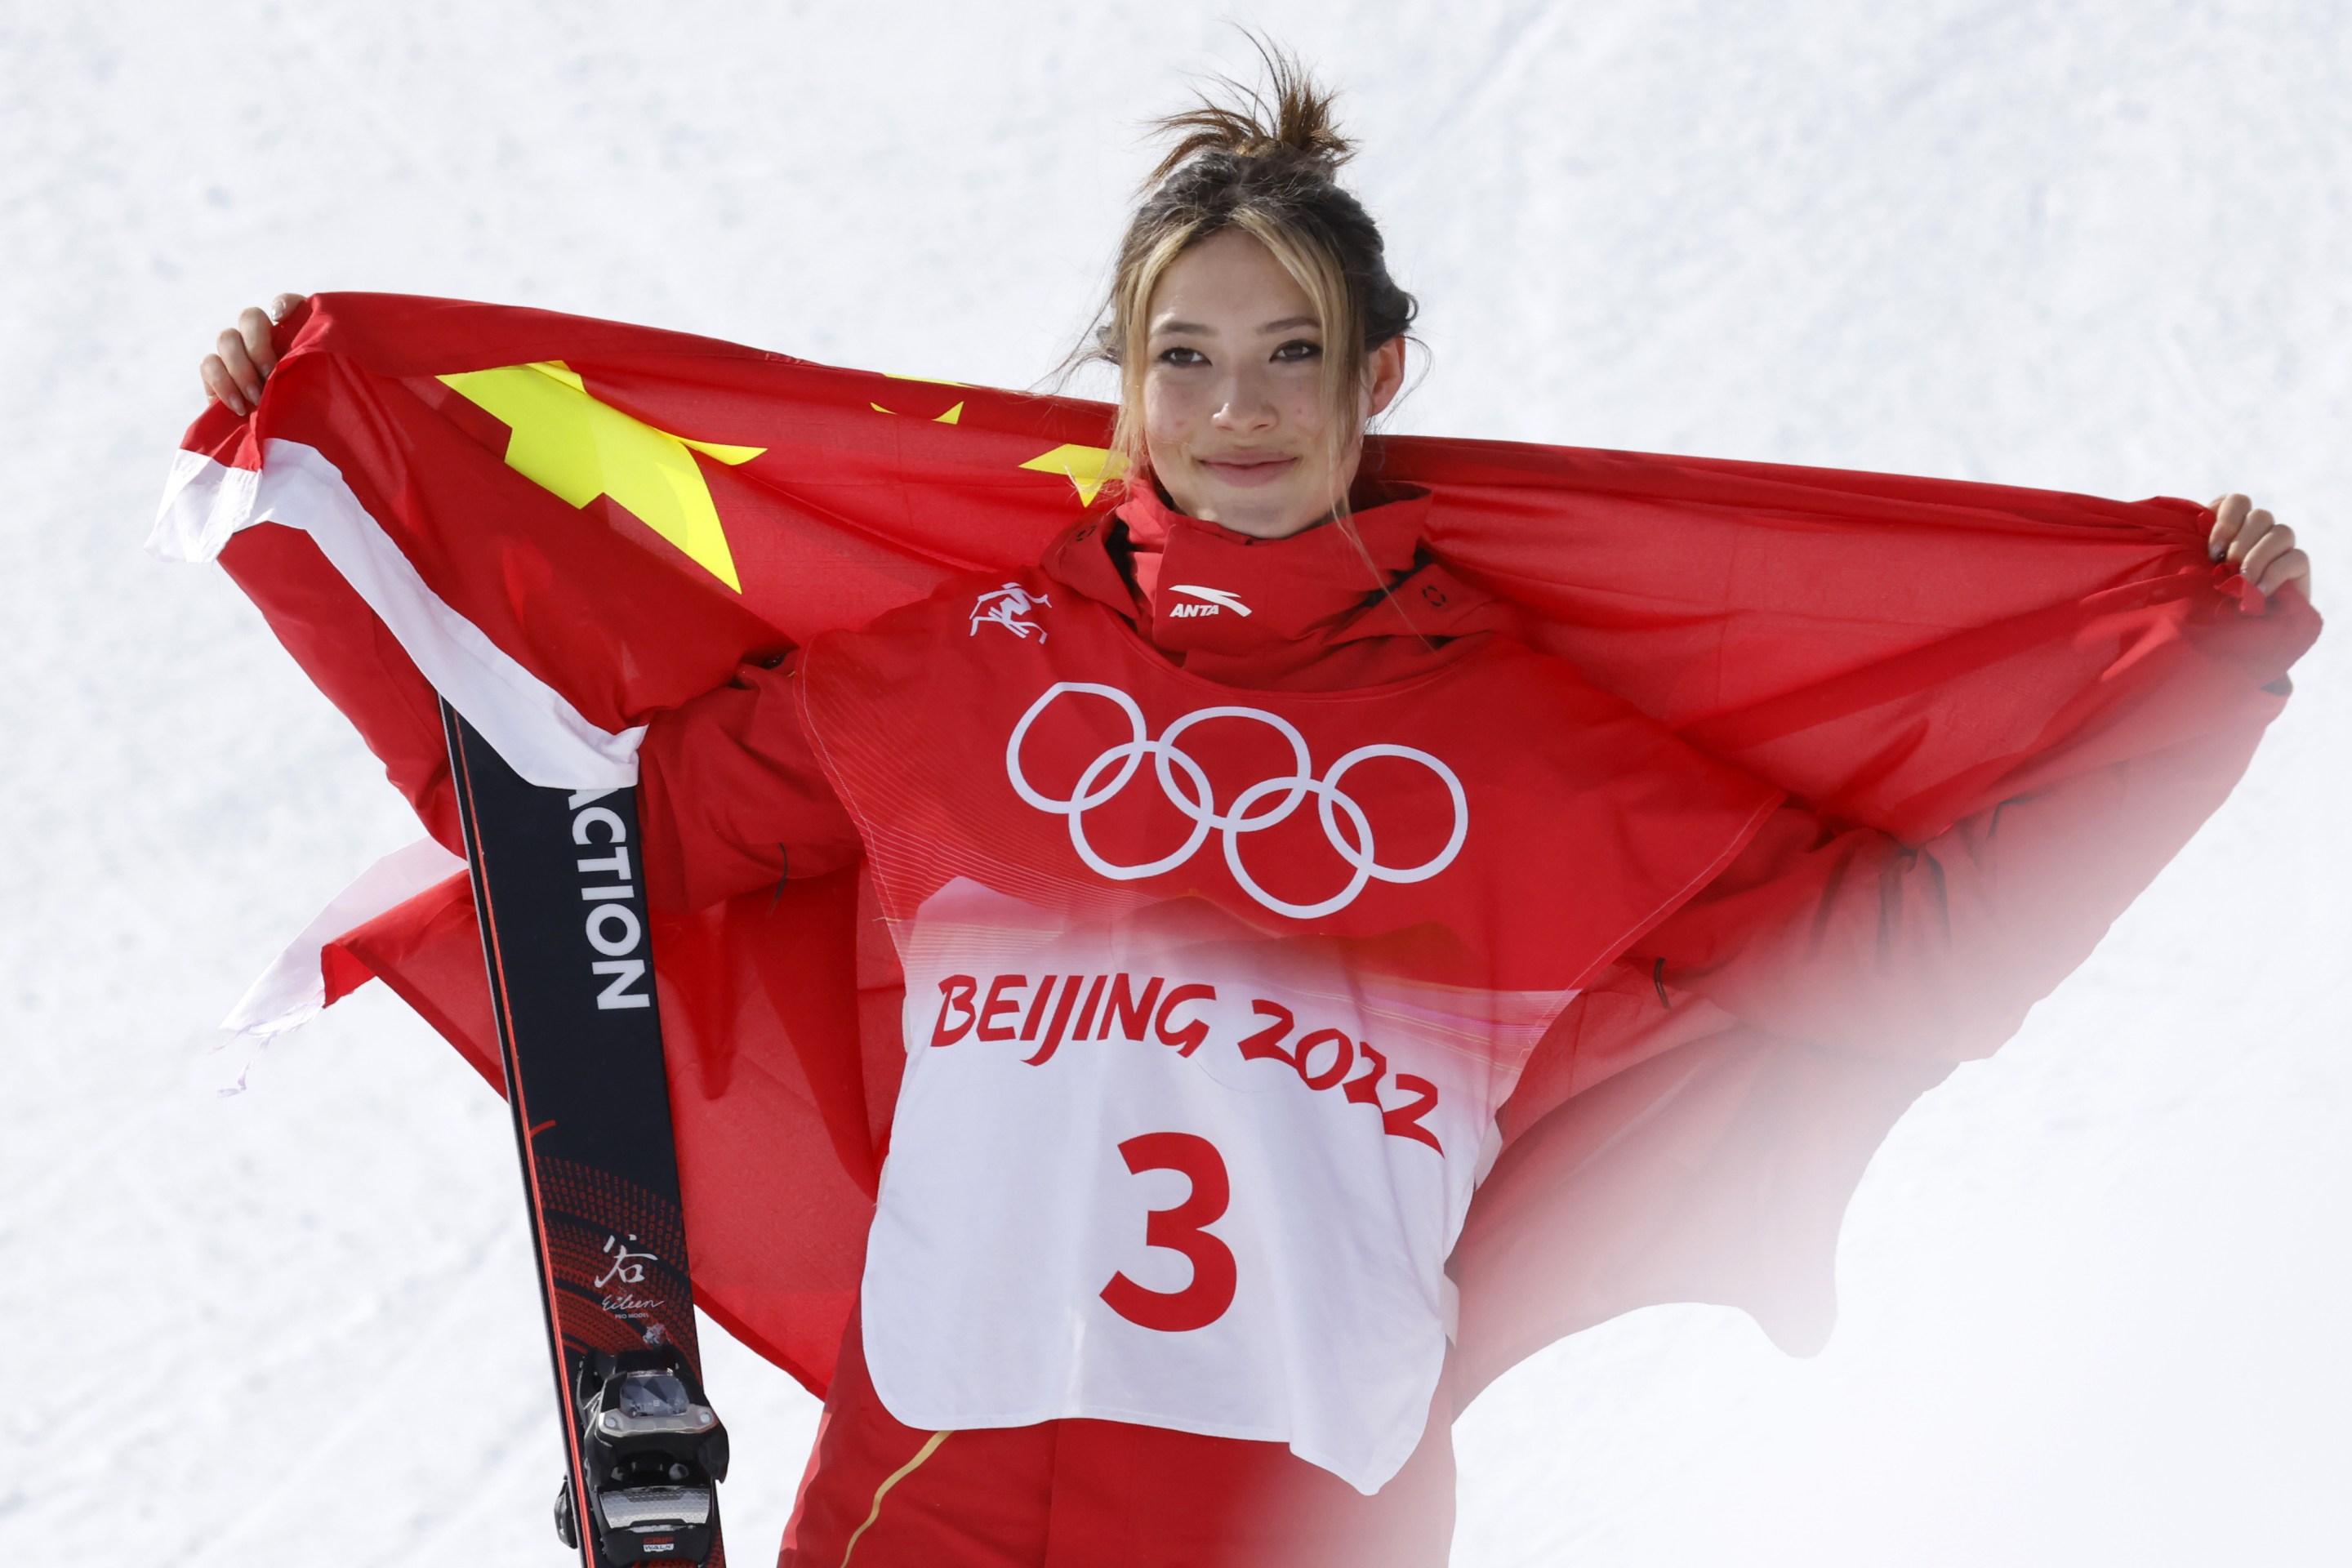 BEIJING, CHINA - FEBRUARY 15 : Ailing Eileen Gu of Team China wins the silver medal during the Olympic Games 2022, women's Freeski Slopestyle on February 15, 2022 in Zhangjiakou China.